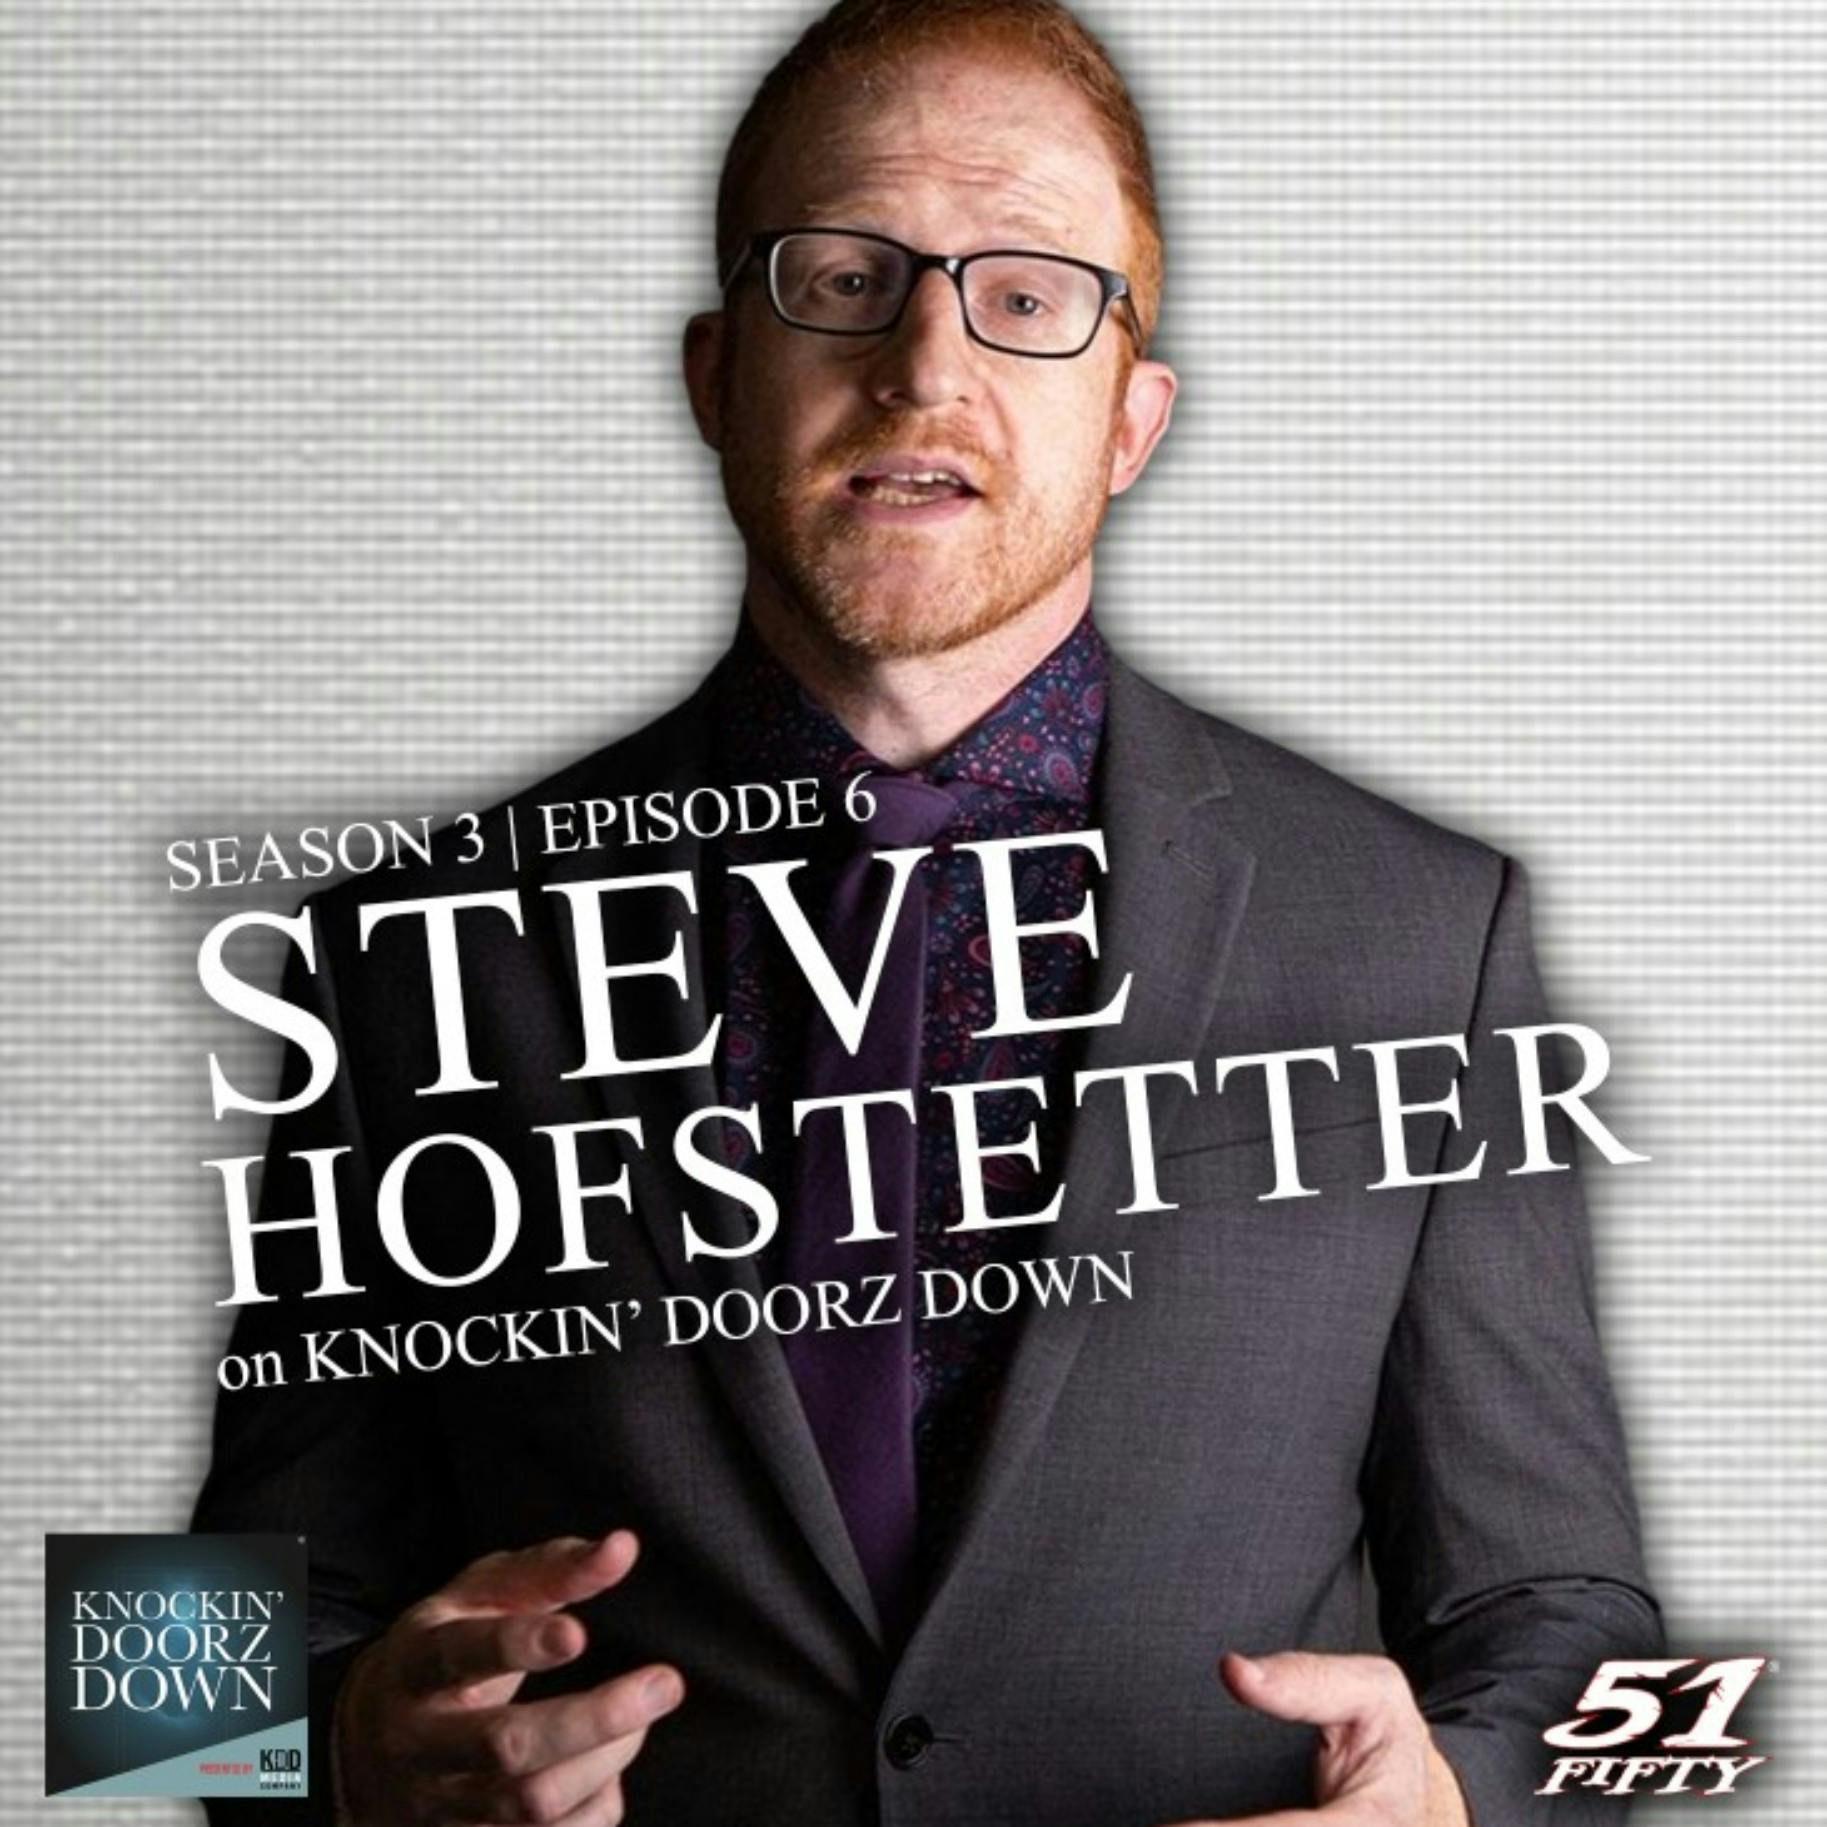 Steve Hofstetter | Comedian, Author, Mental Health On the Road, Anxiety, Alcohol & Online Trolls